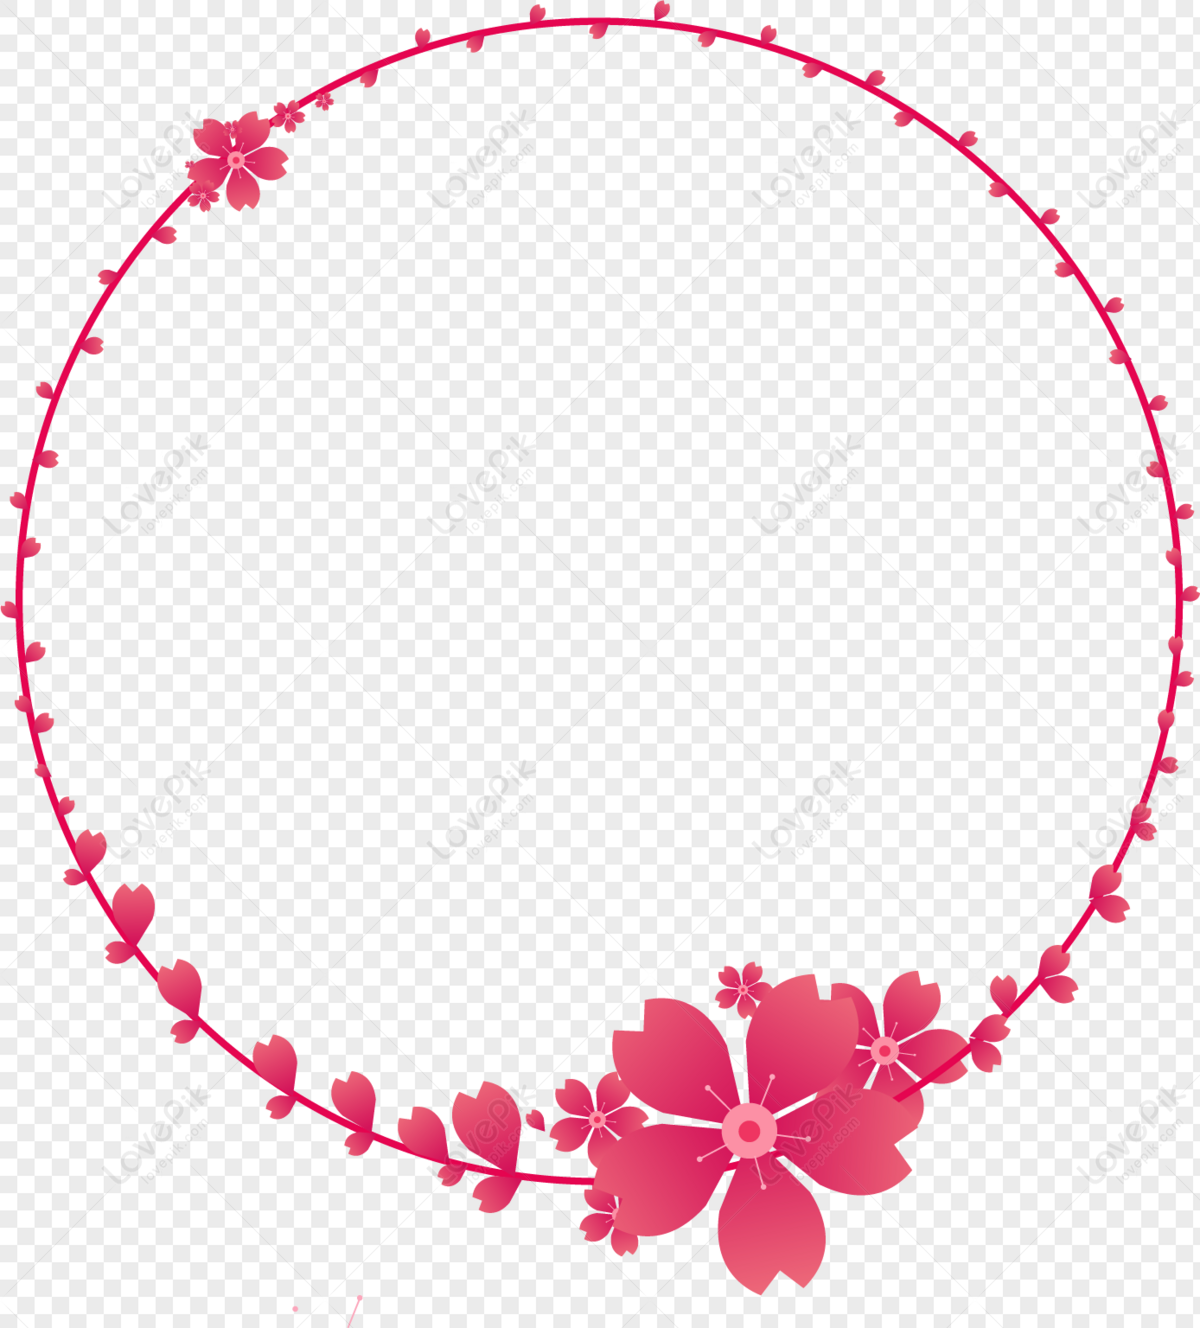 round frame clipart png